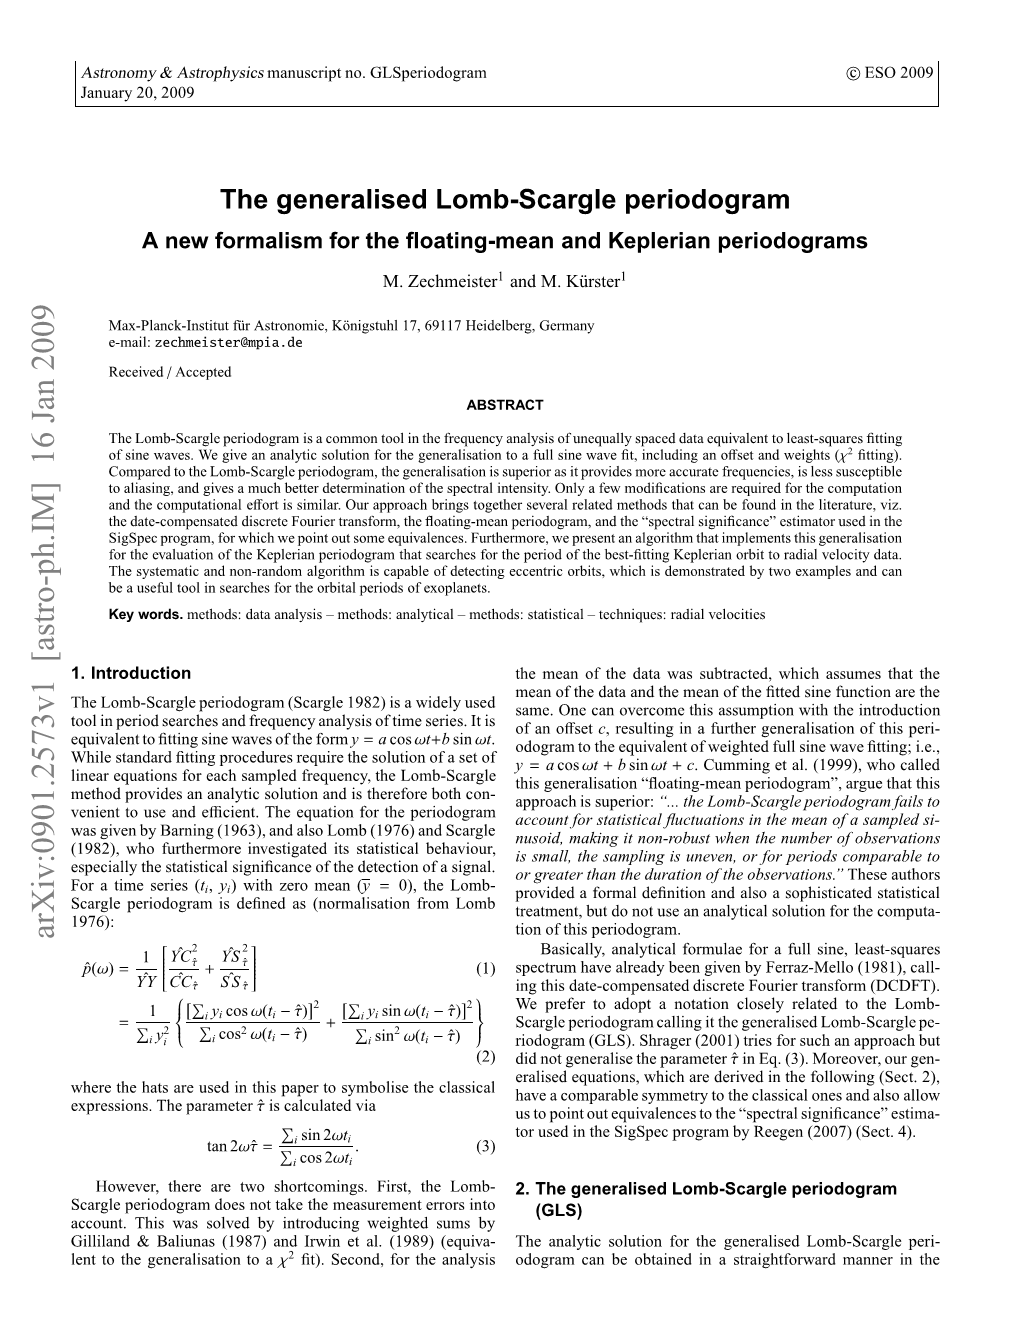 The Generalised Lomb-Scargle Periodogram Same Way As Outlined in Lomb (1976)